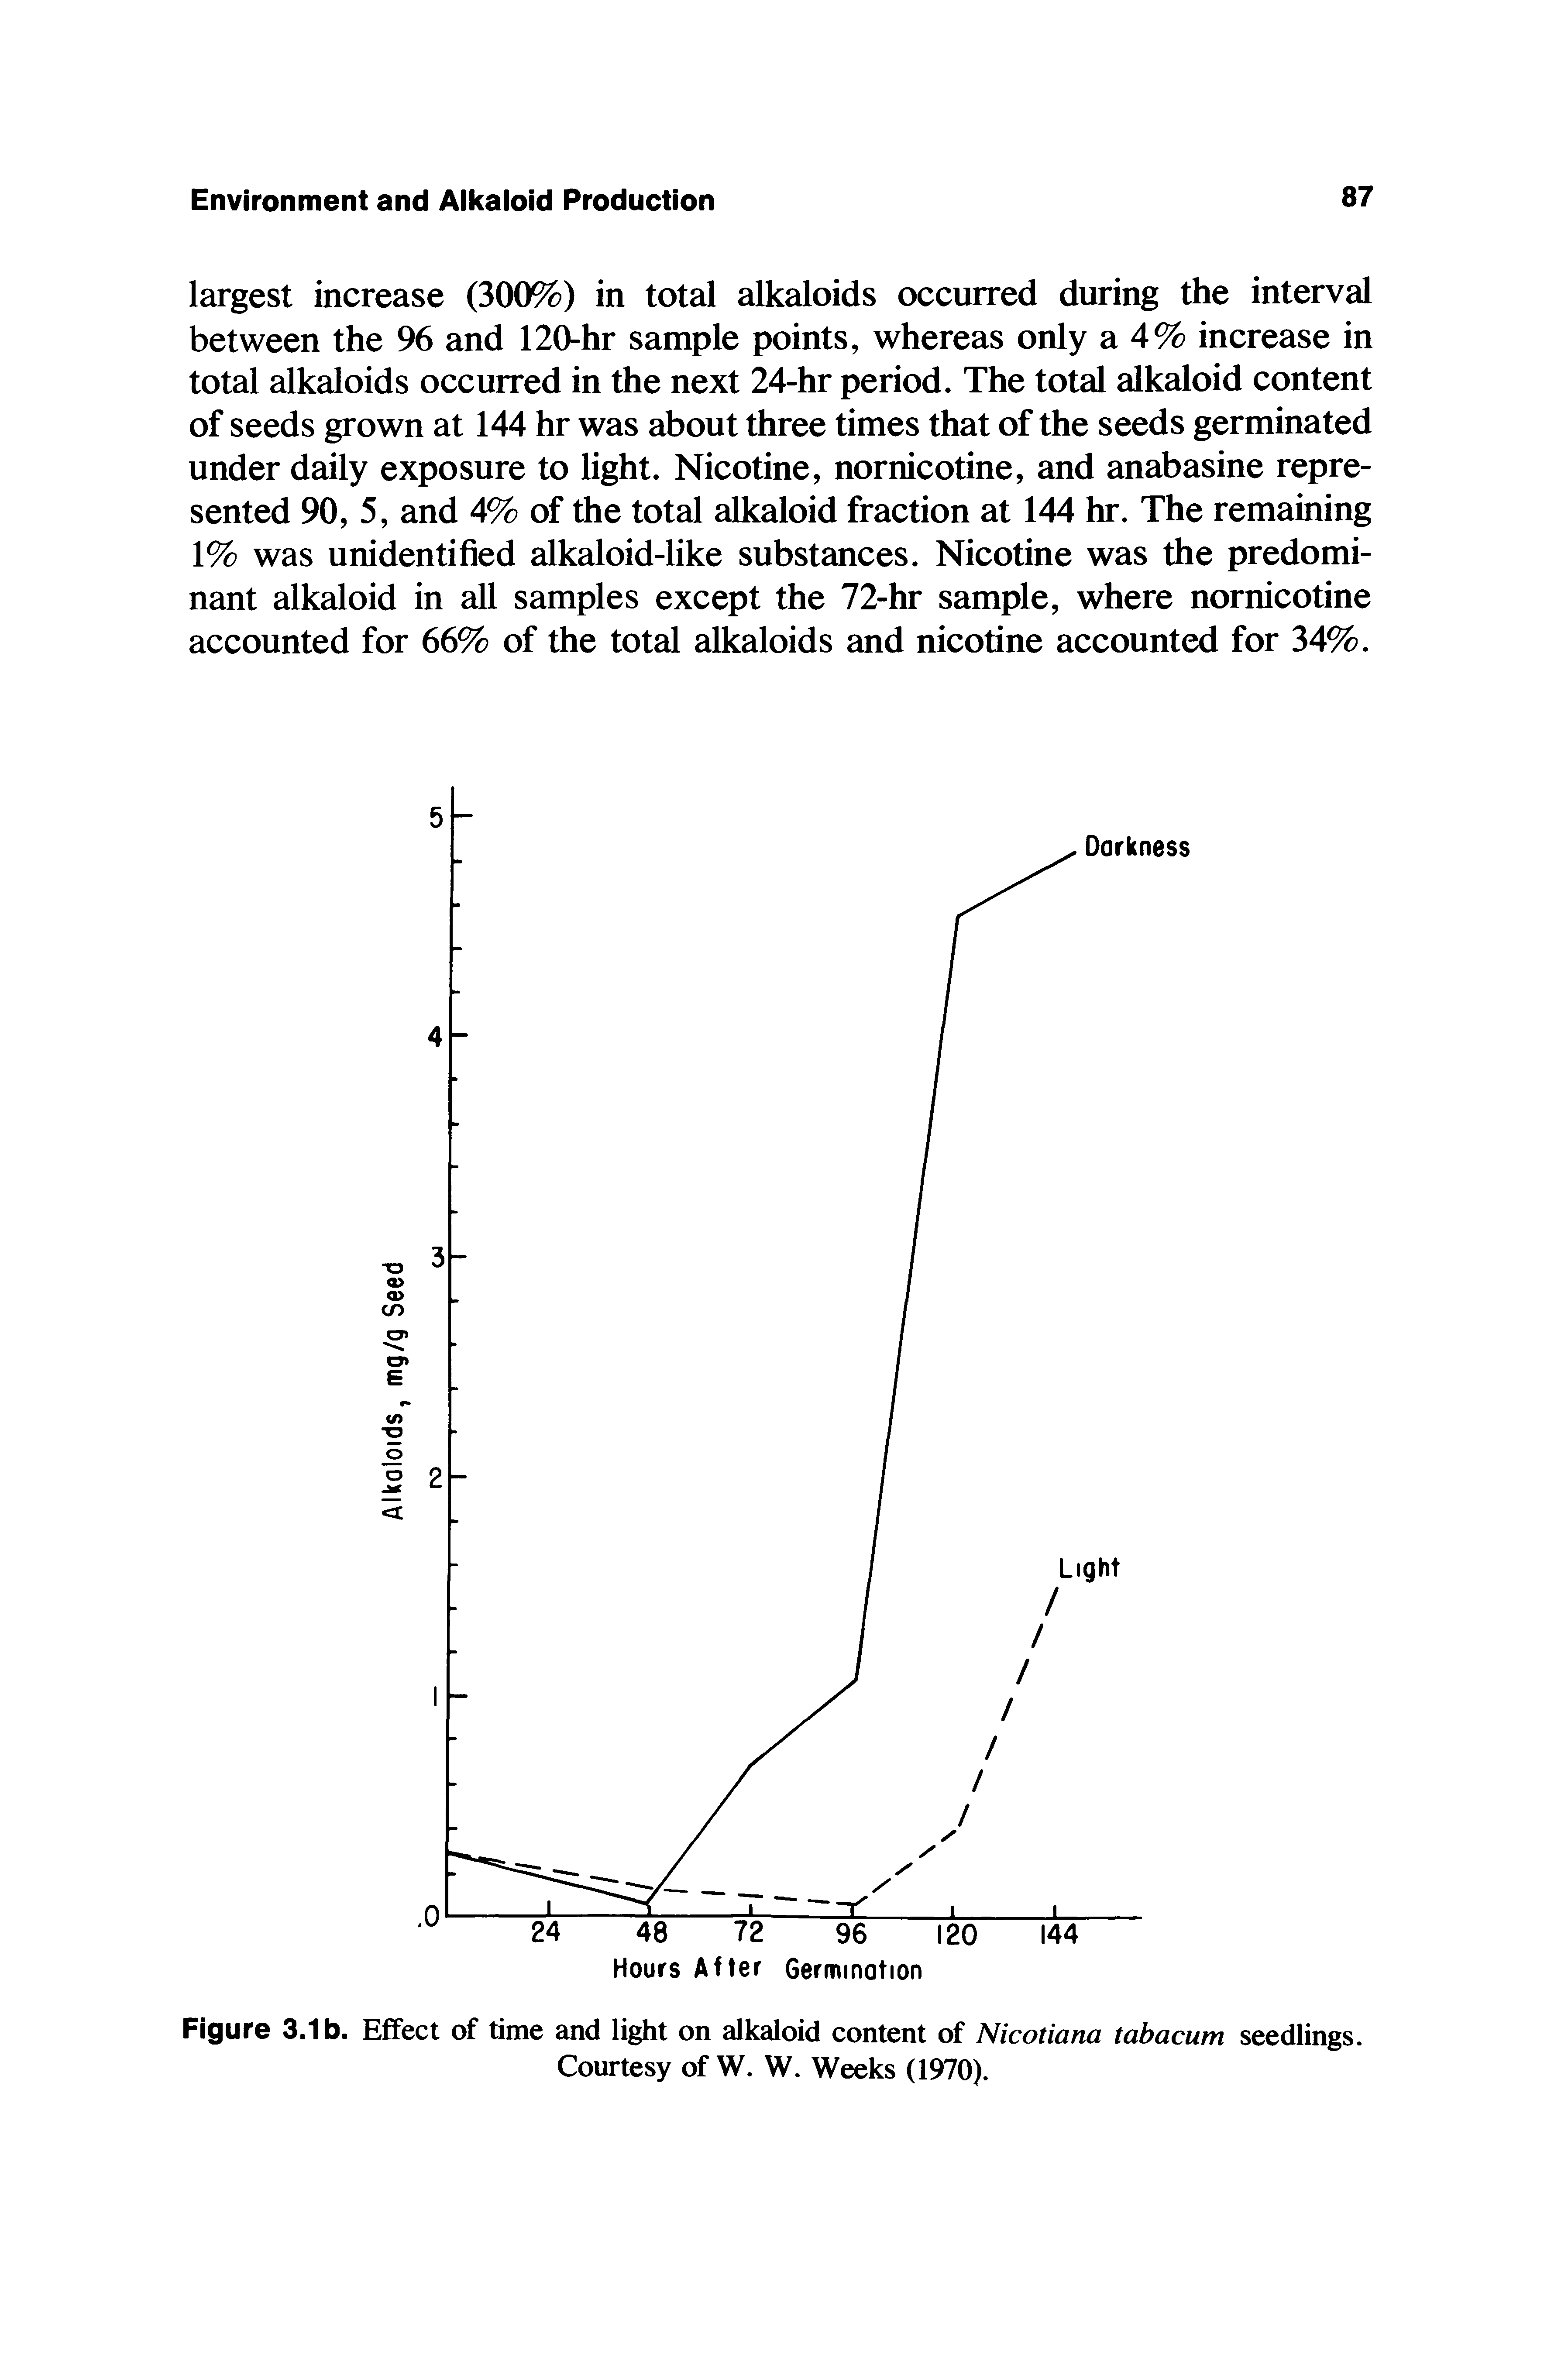 Figure 3.1b. Effect of time and light on alkaloid content of Nicotiana tabacum seedlings. Courtesy of W. W. Weeks (1970).